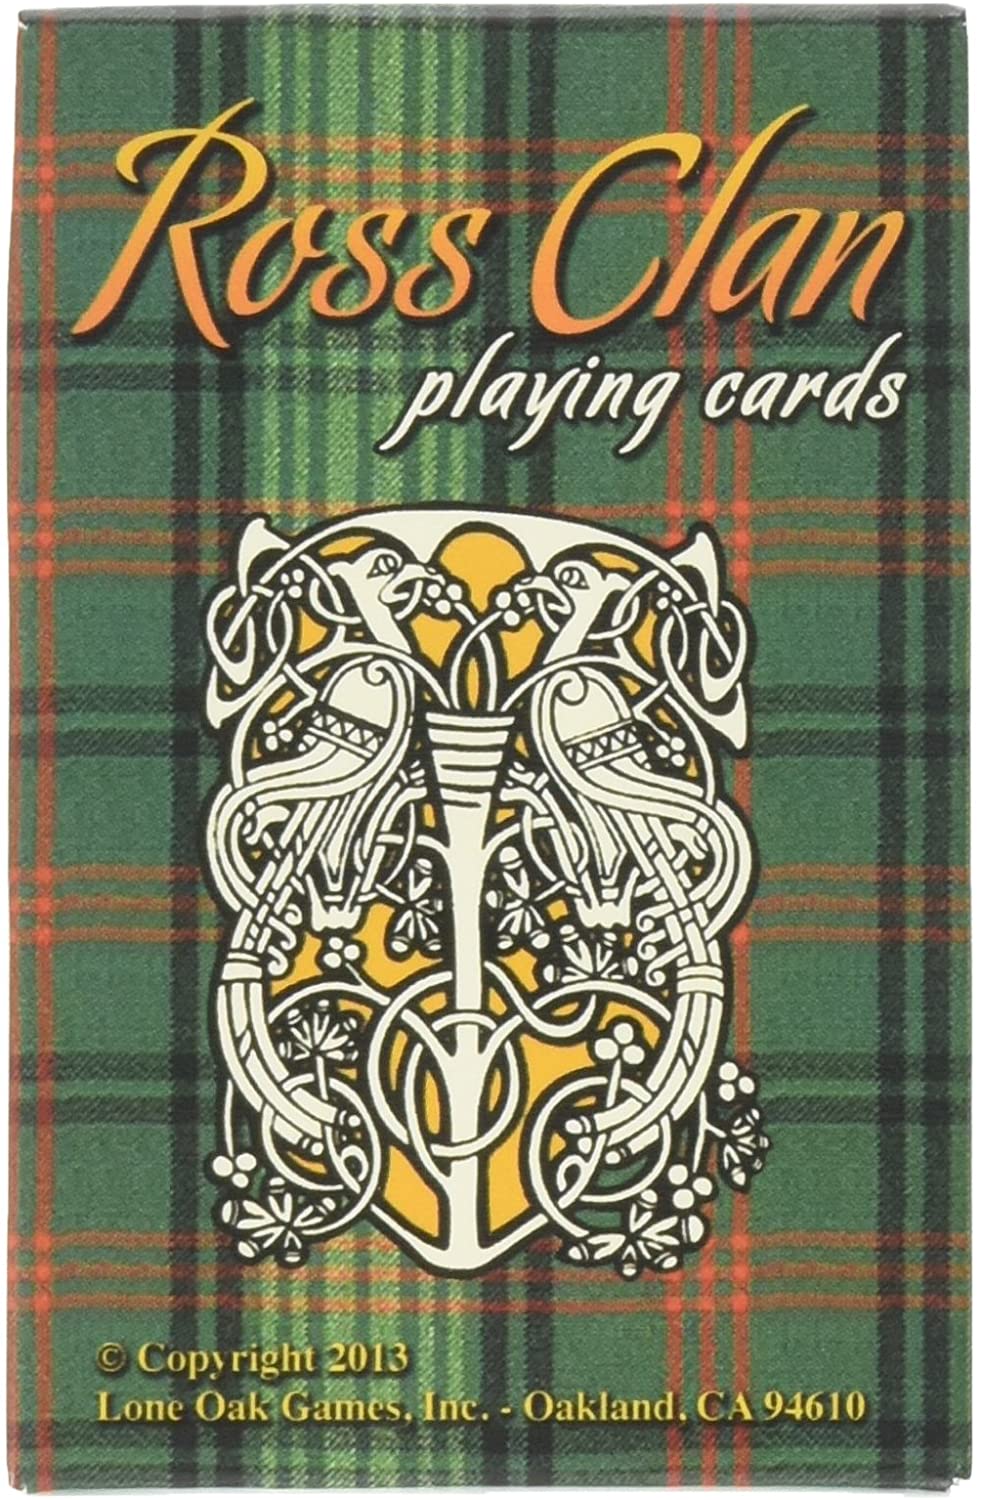 Ross Clan Playing Cards